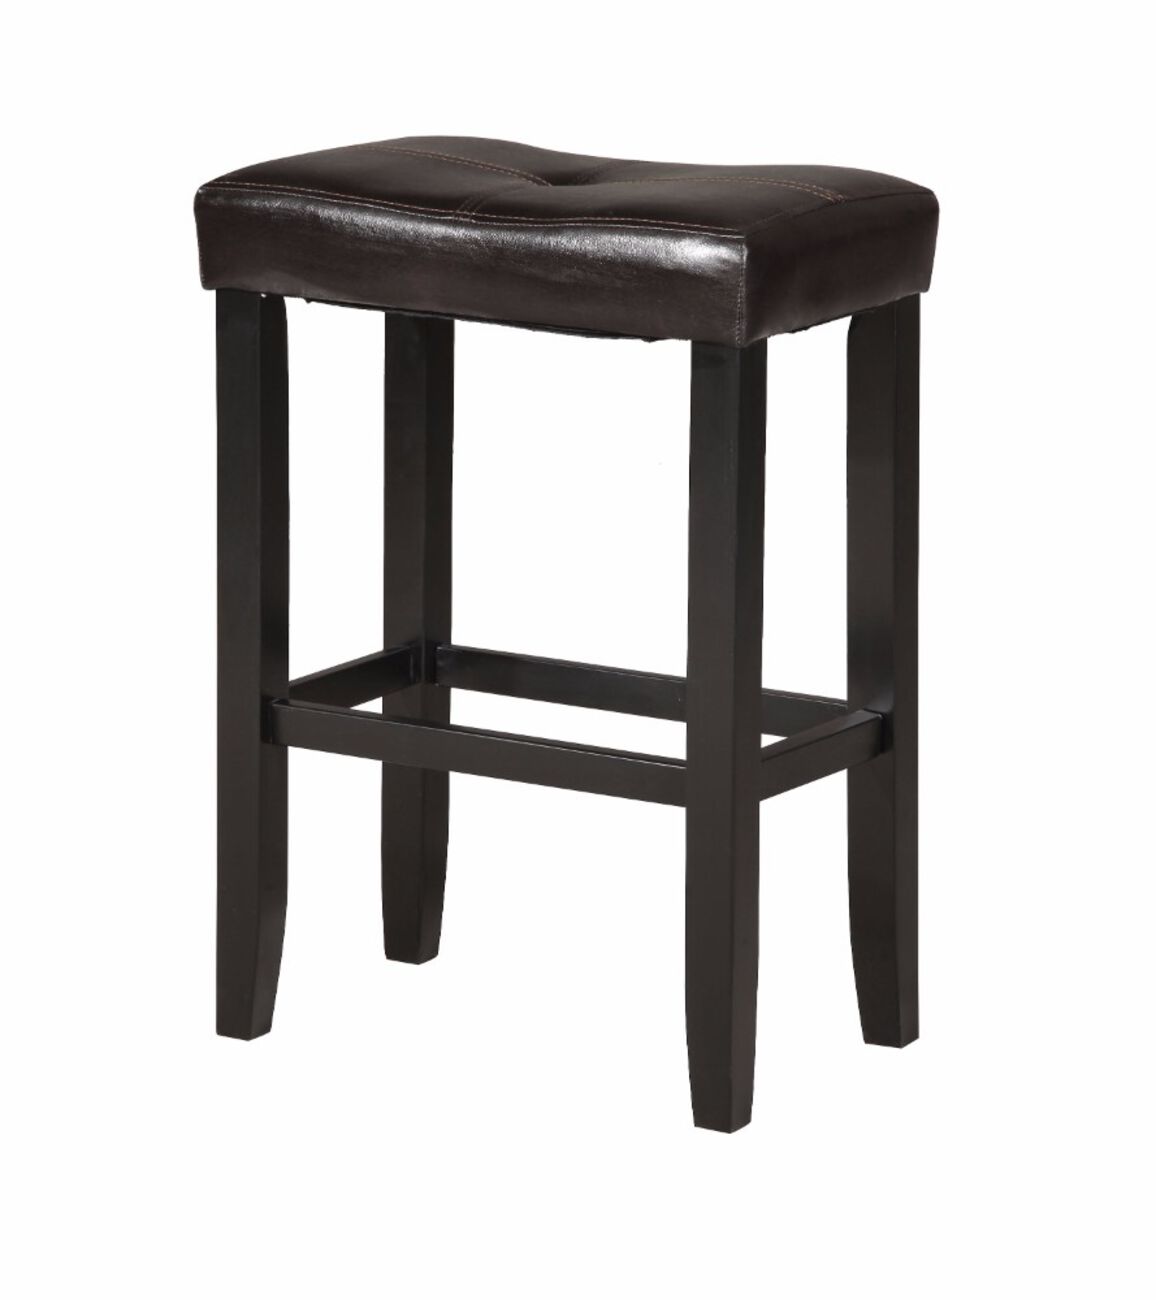 Wooden Counter Height Stool (Set-2), Espresso Brown & Black